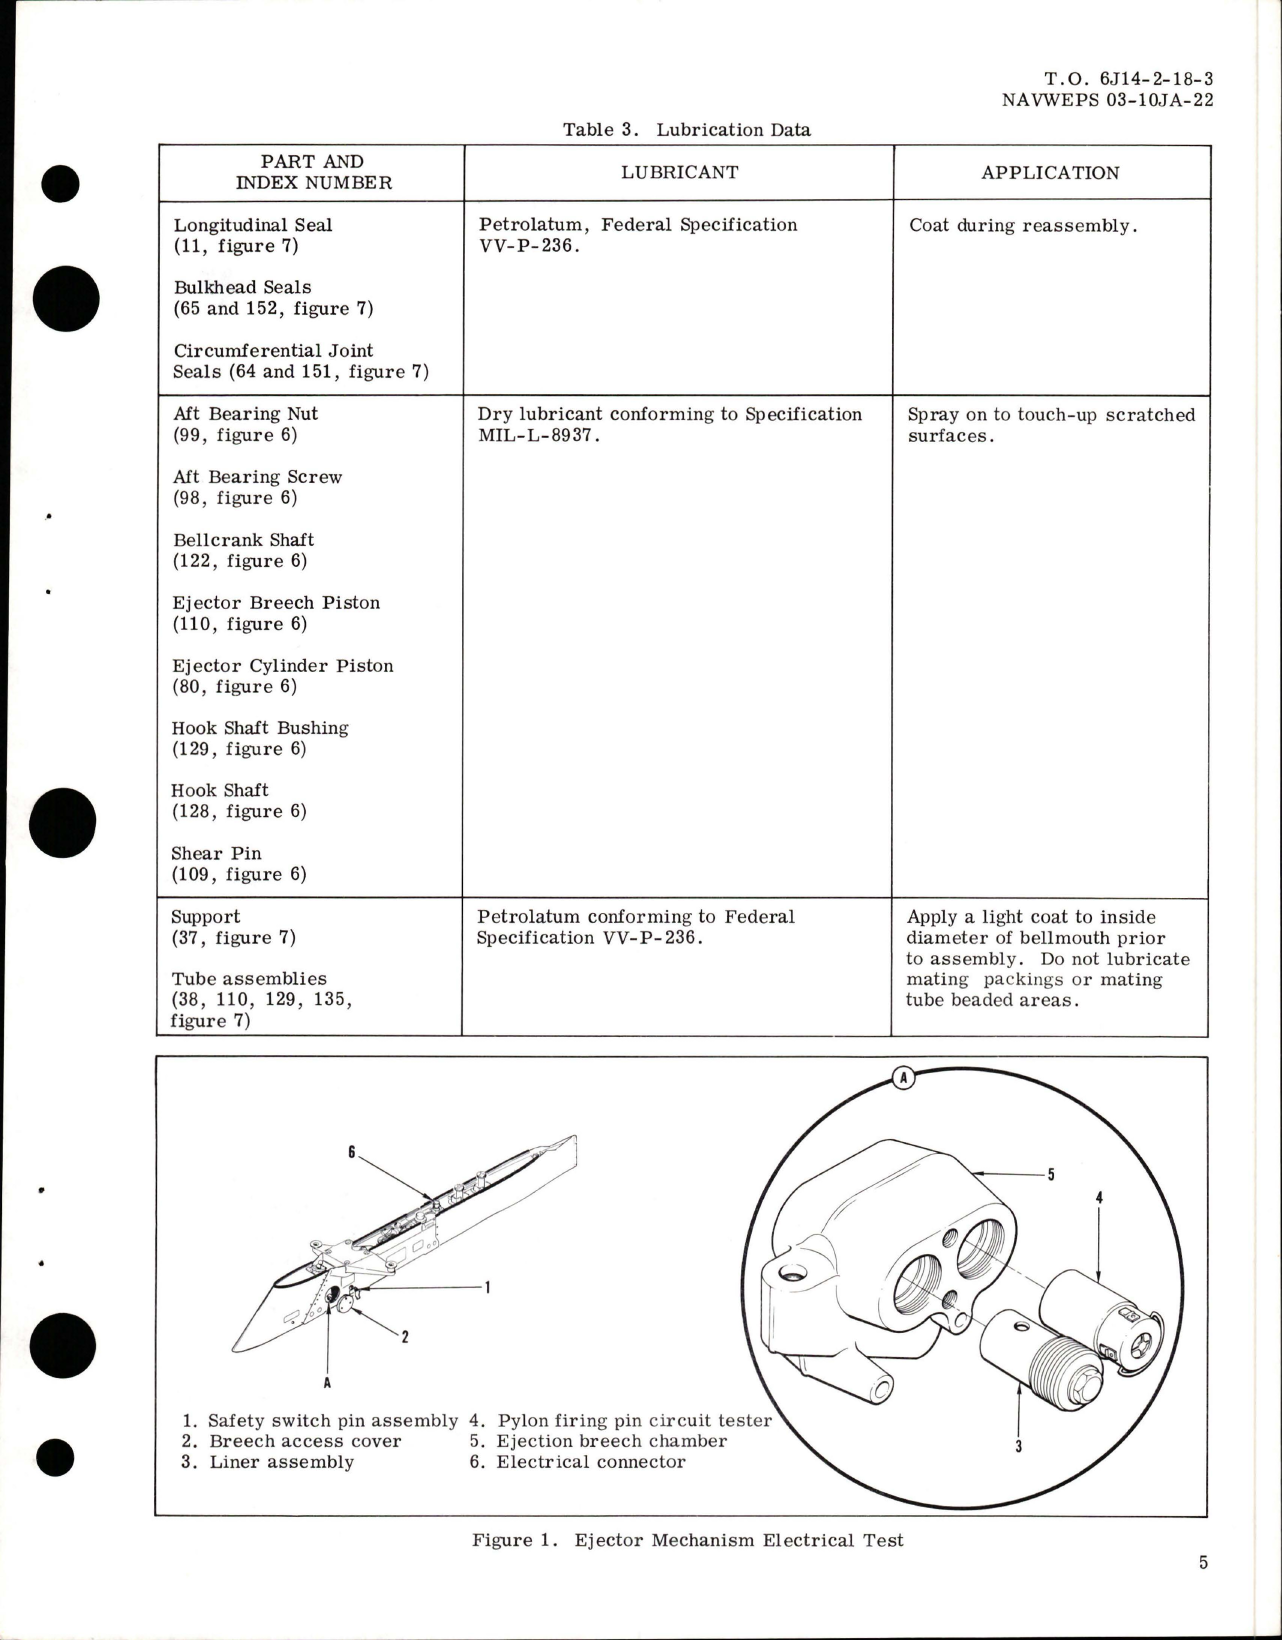 Sample page 7 from AirCorps Library document: Overhaul with Parts for 370 Gallon Tank and Ejector Pylon Assembly - Parts 26-370-4843 and 26-370-4845